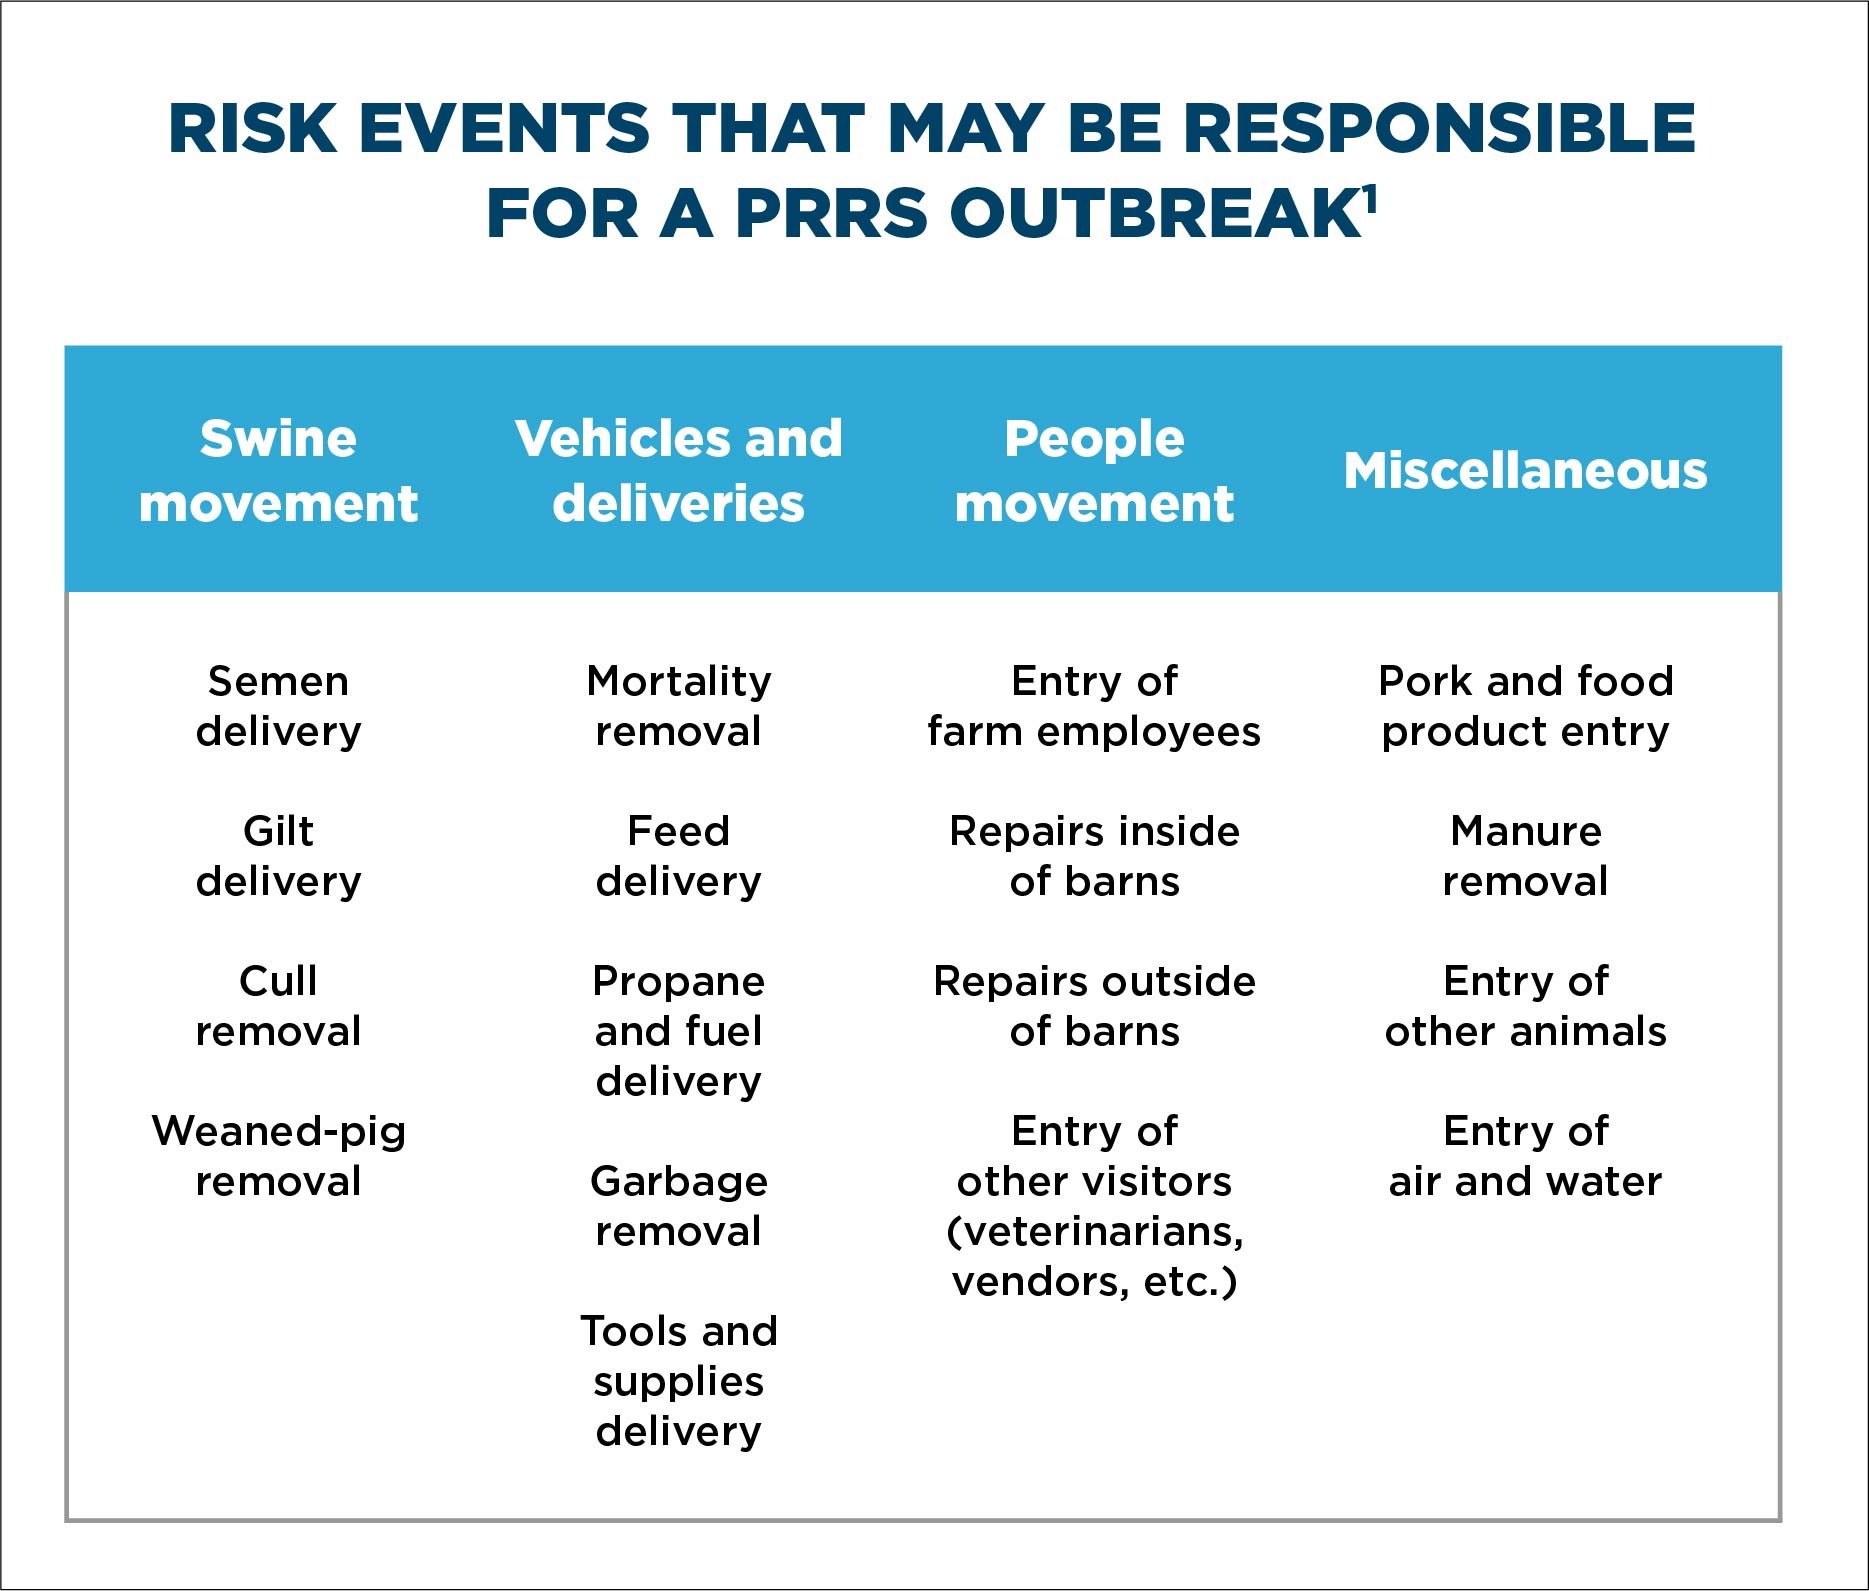 RISK EVENTS THAT MAY BE RESPONSIBLE FOR A PRRS OUTBREAK